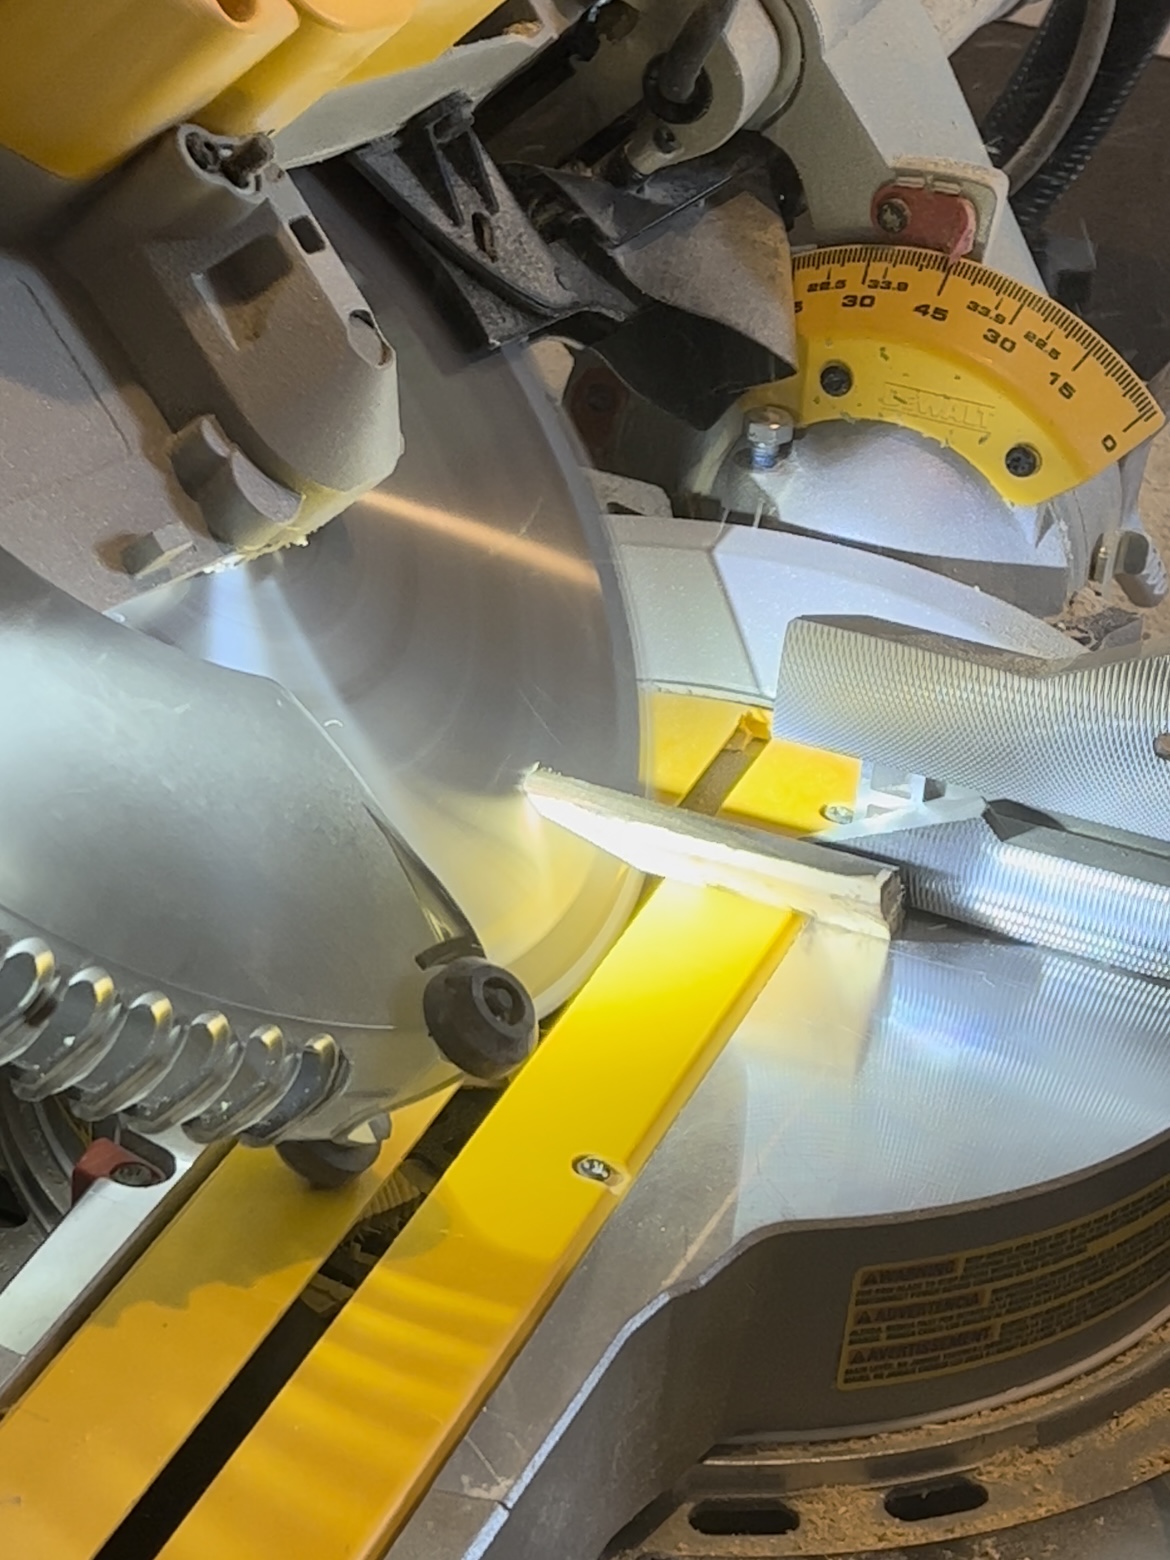 Miter saw cutting trim at a beveled 45 degree angle.